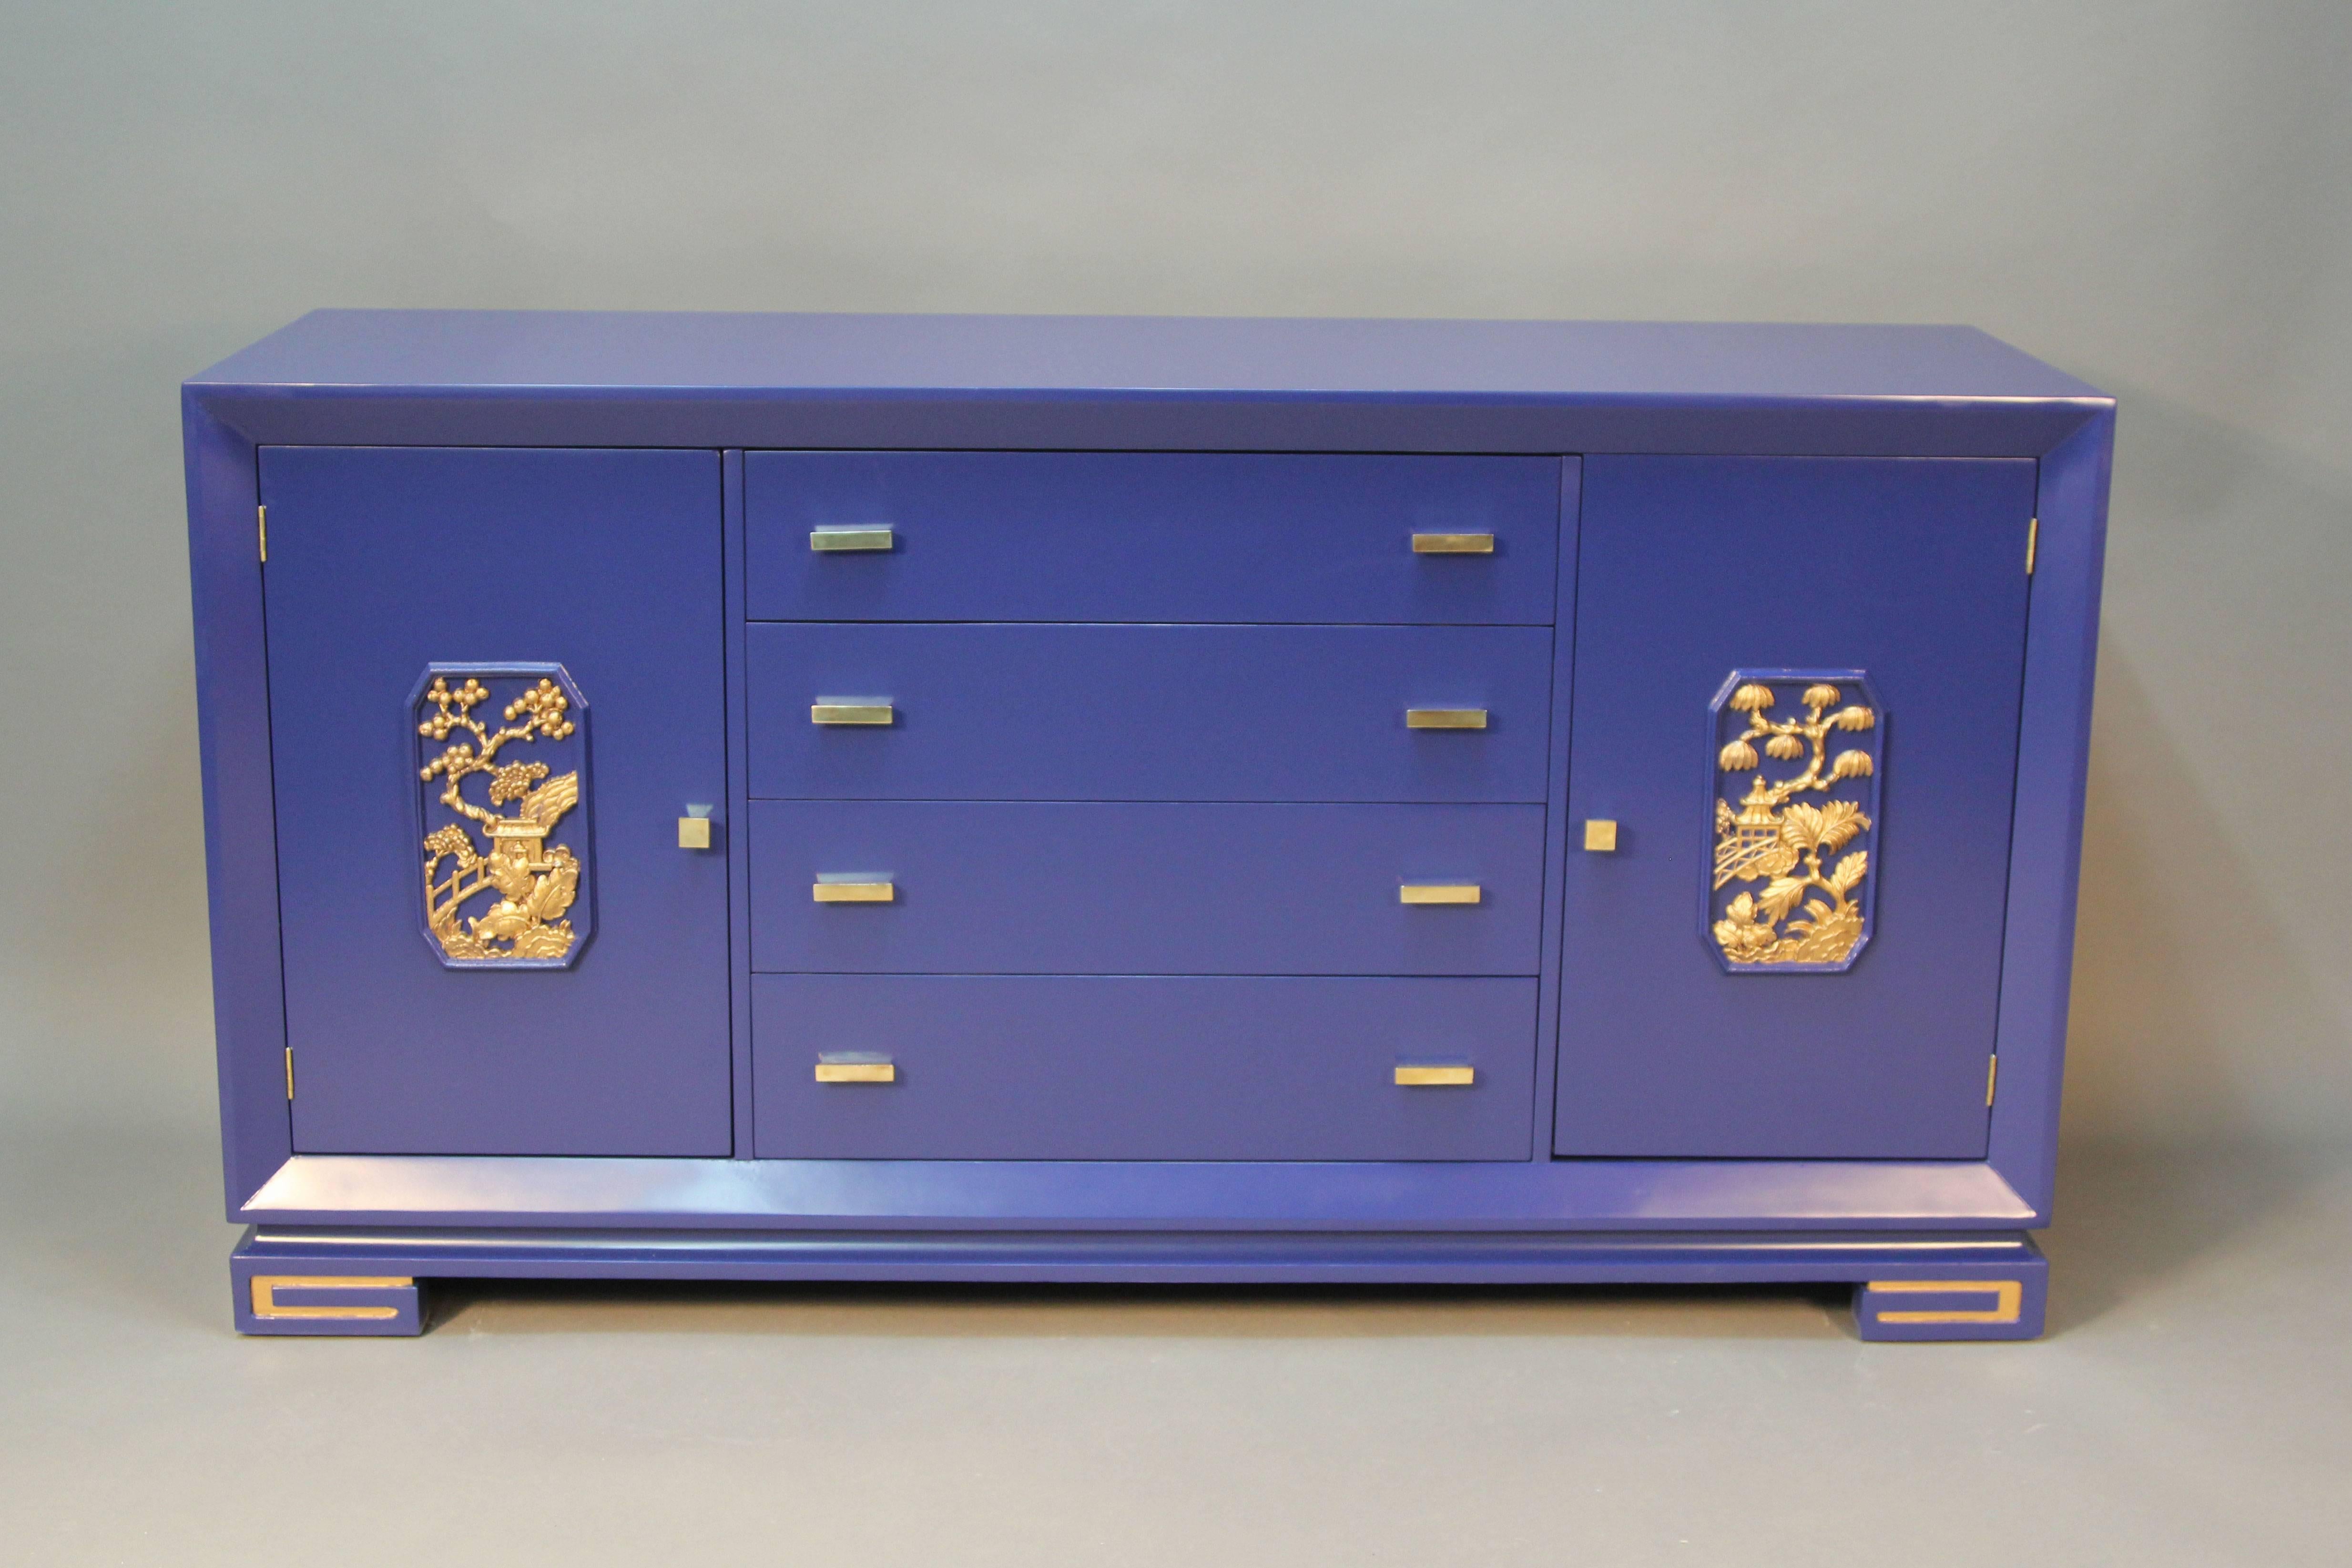 James Mont designed sideboard/credenza. Four drawers and two cabinets with silverware drawers. Newly lacquered in navy blue with gold accent details. Polished brass original hardware.